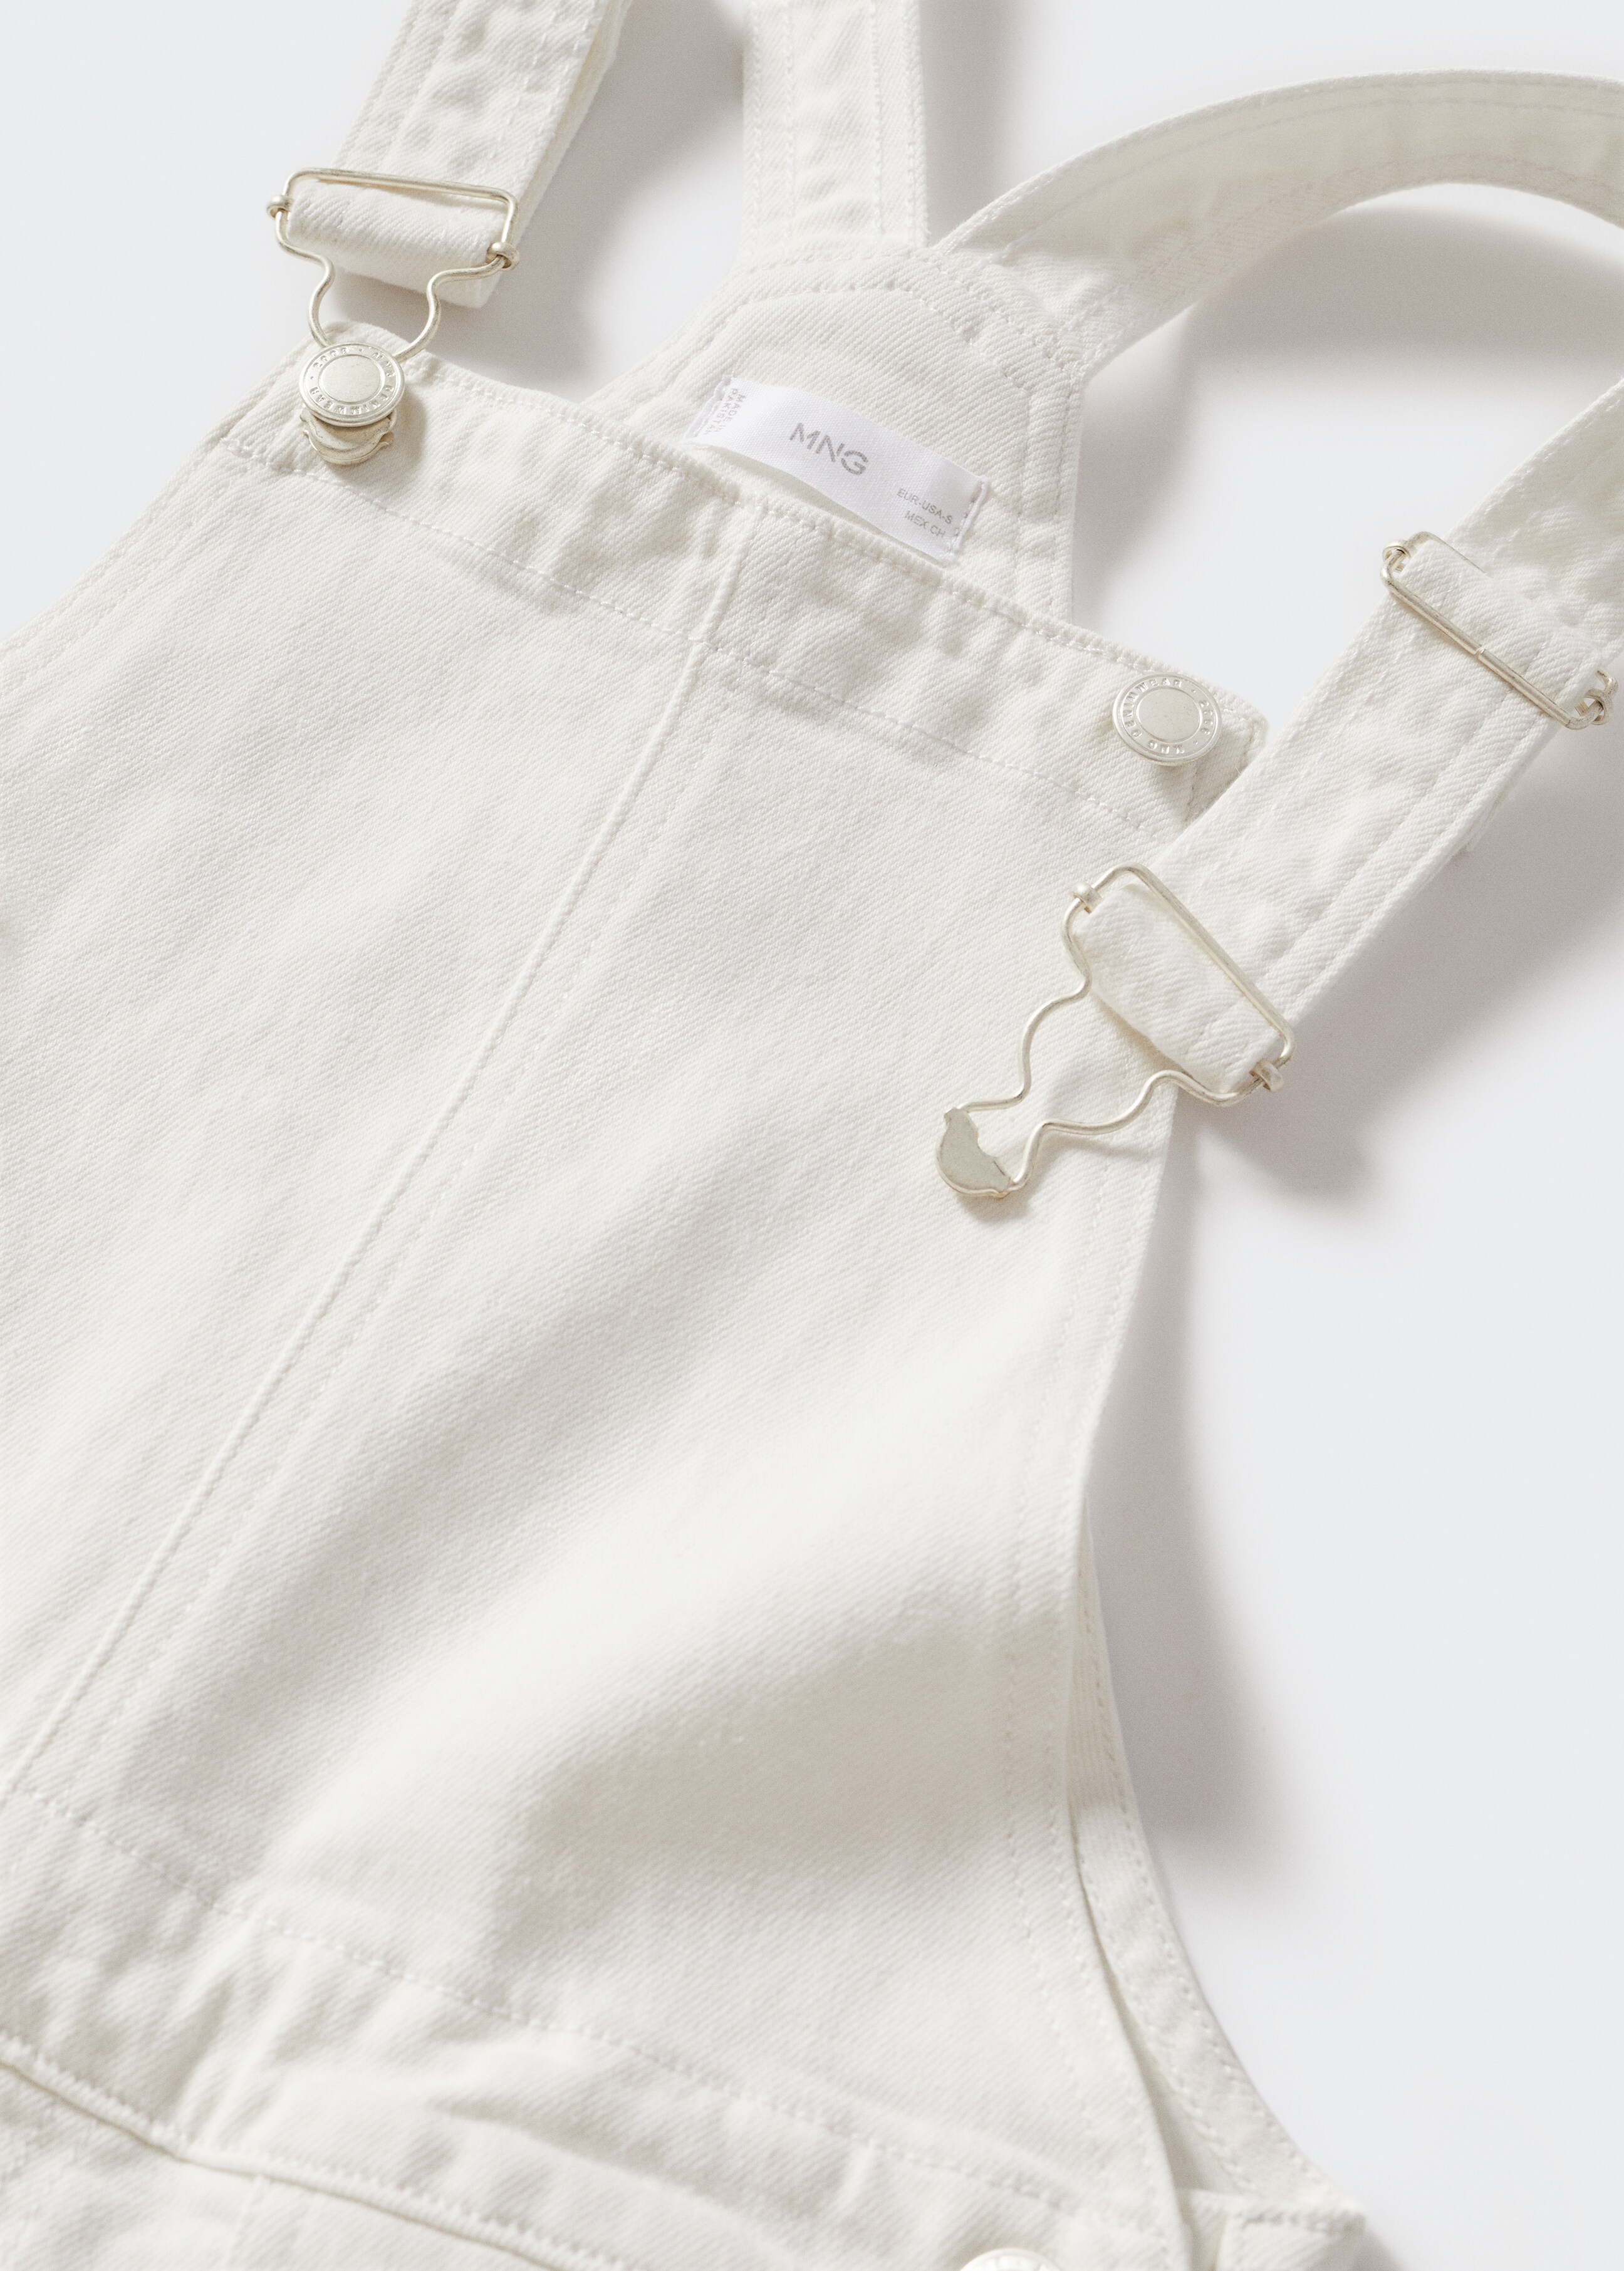 Denim culotte dungarees - Details of the article 8